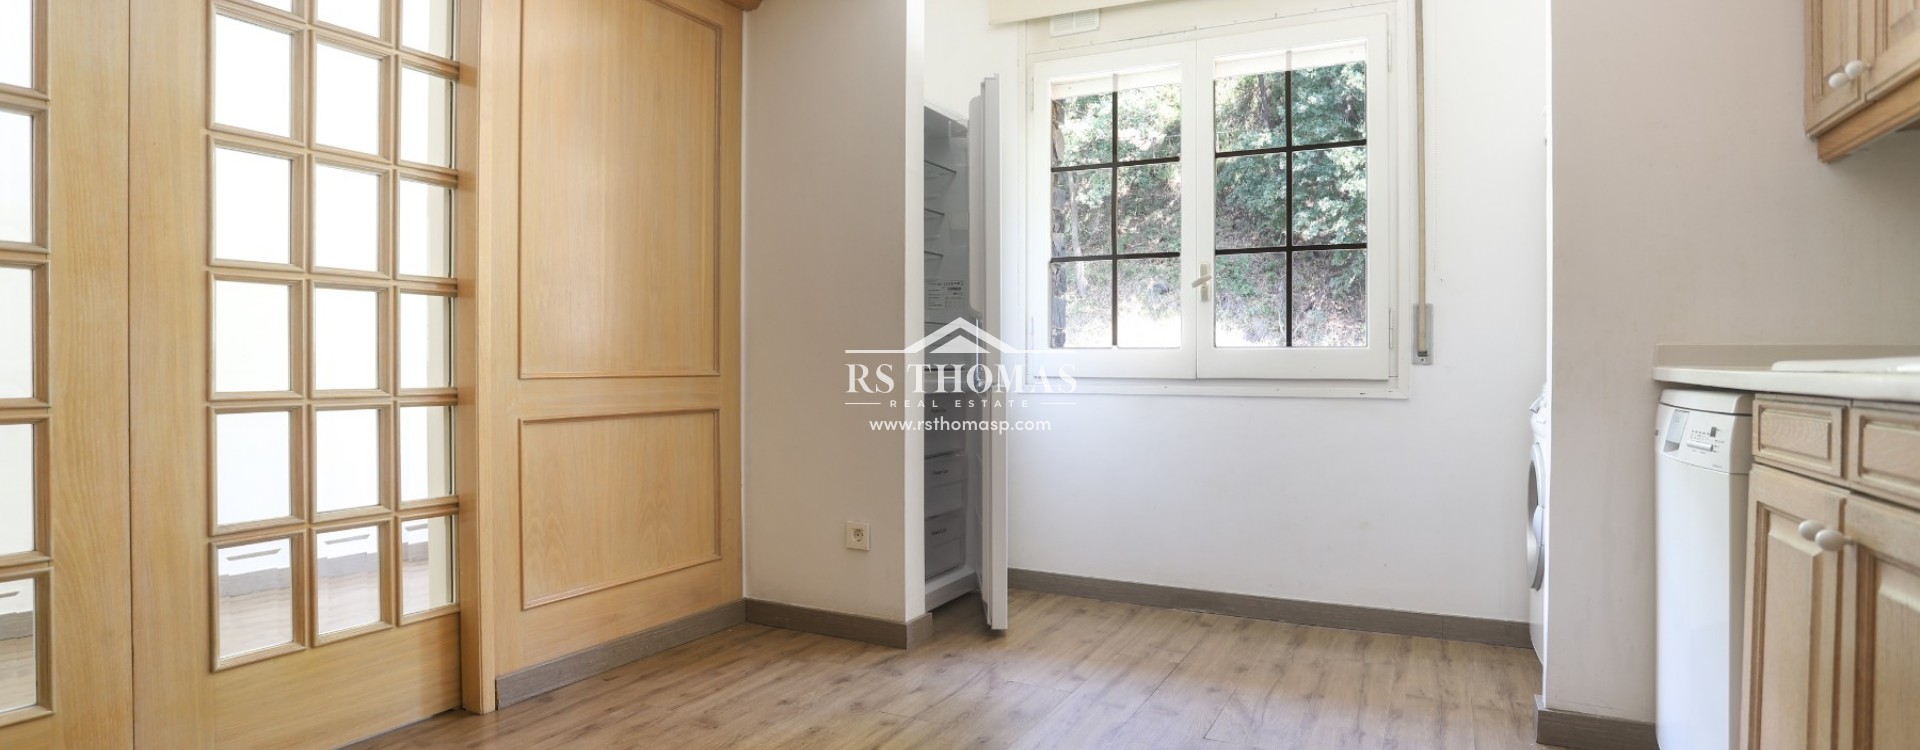 Penthouse for sale in Escaldes-Engordany